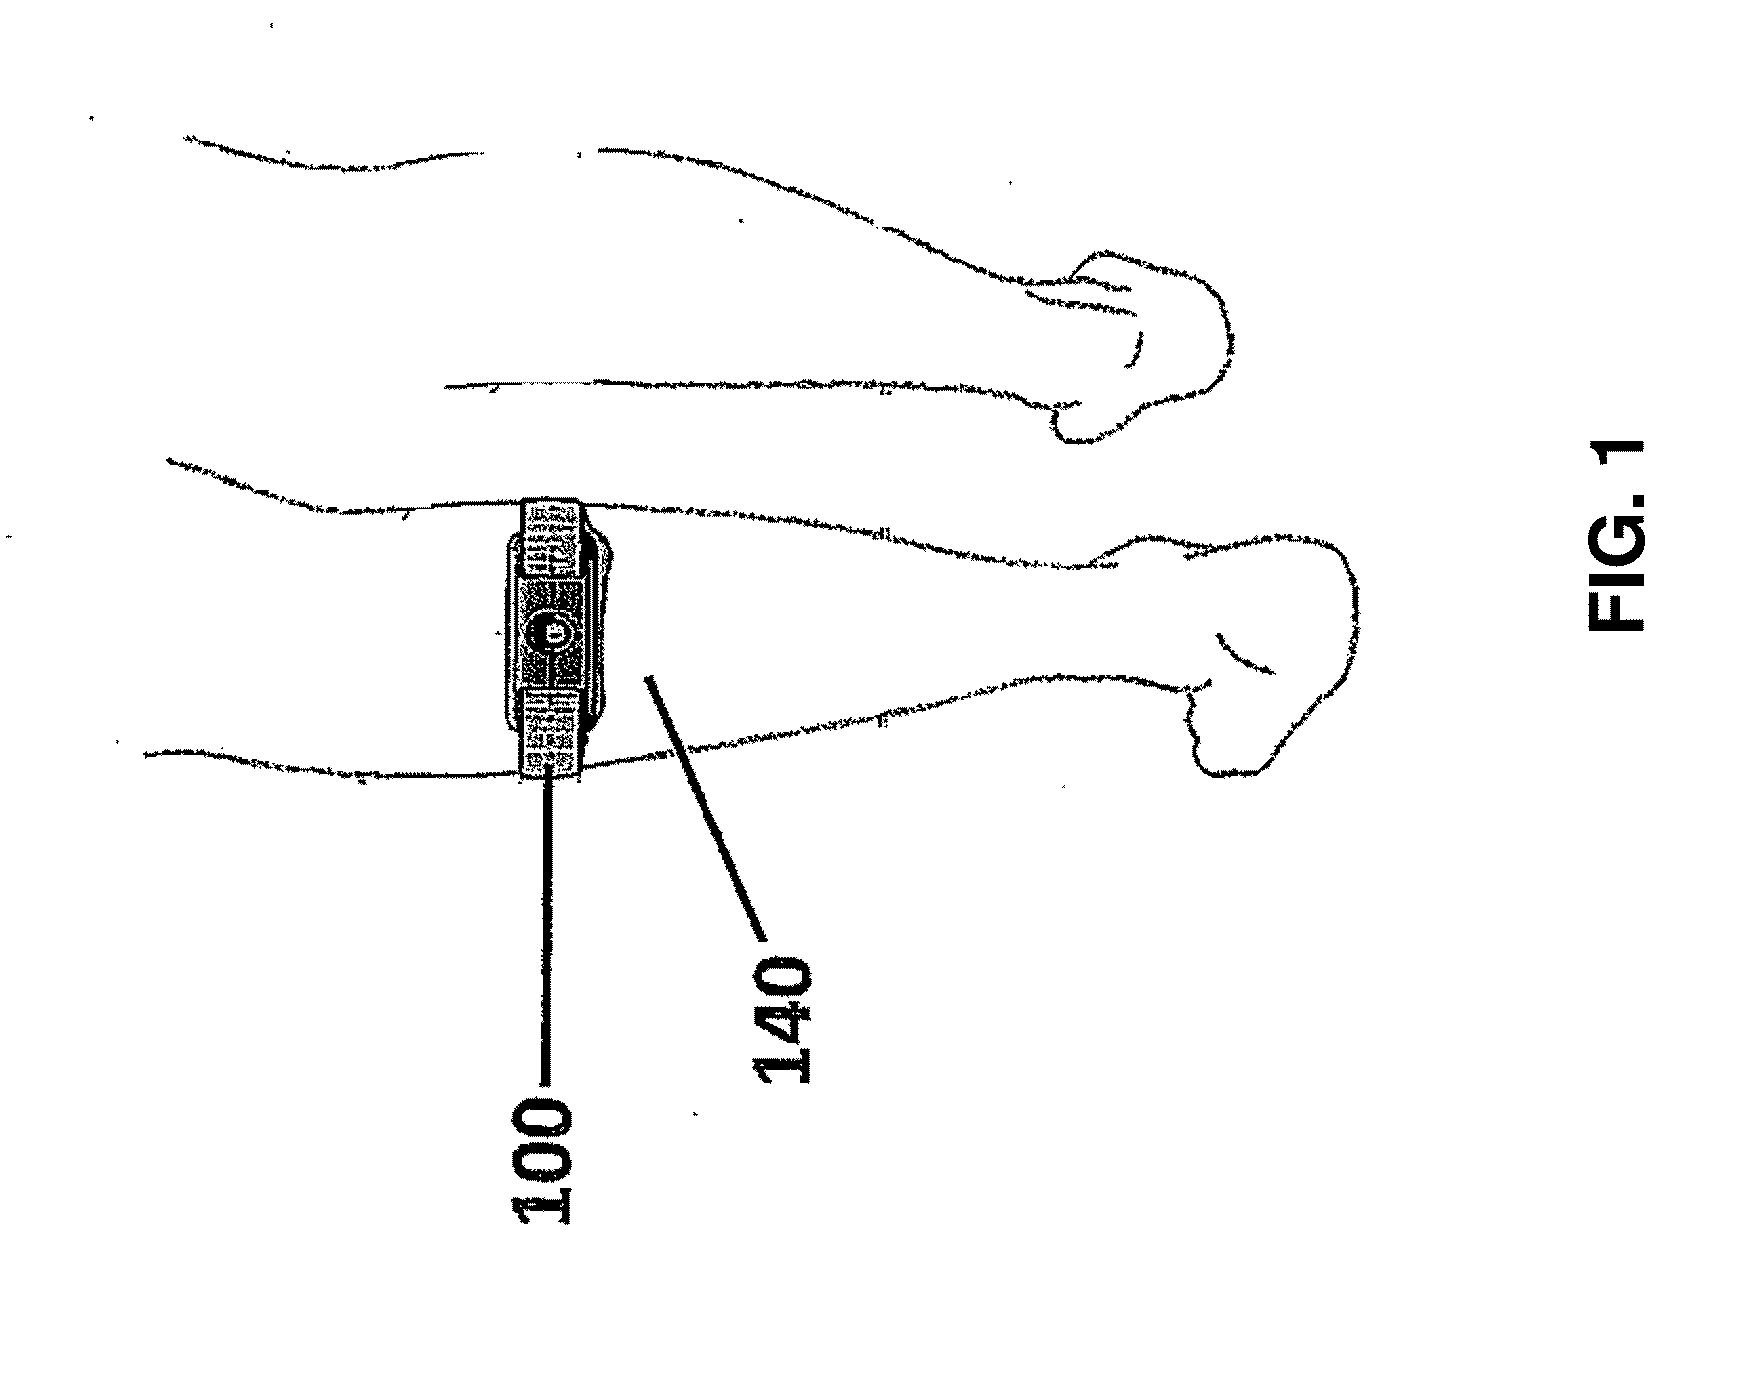 Measuring the "on-skin" time of a transcutaneous electrical nerve stimulator (TENS) device in order to minimize skin irritation due to excessive uninterrupted wearing of the same